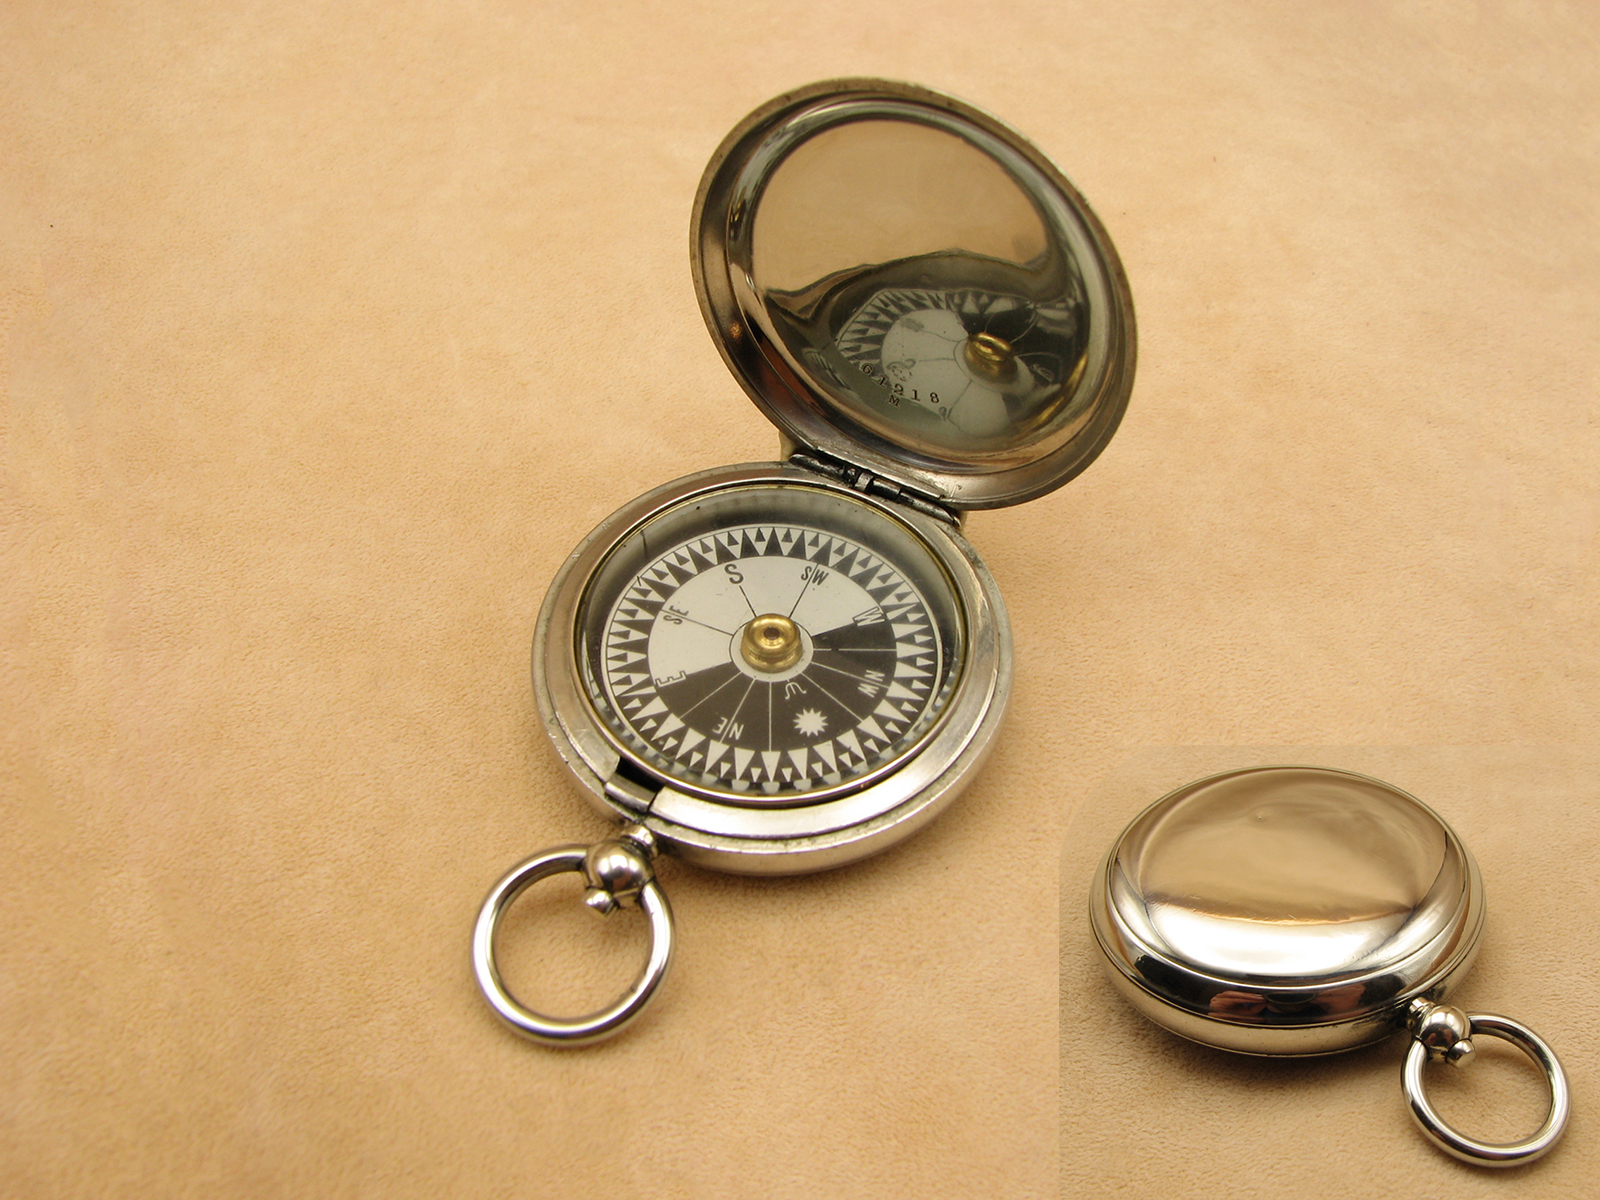 WW1 Short & Mason MK V Military Officers compass dated 1916